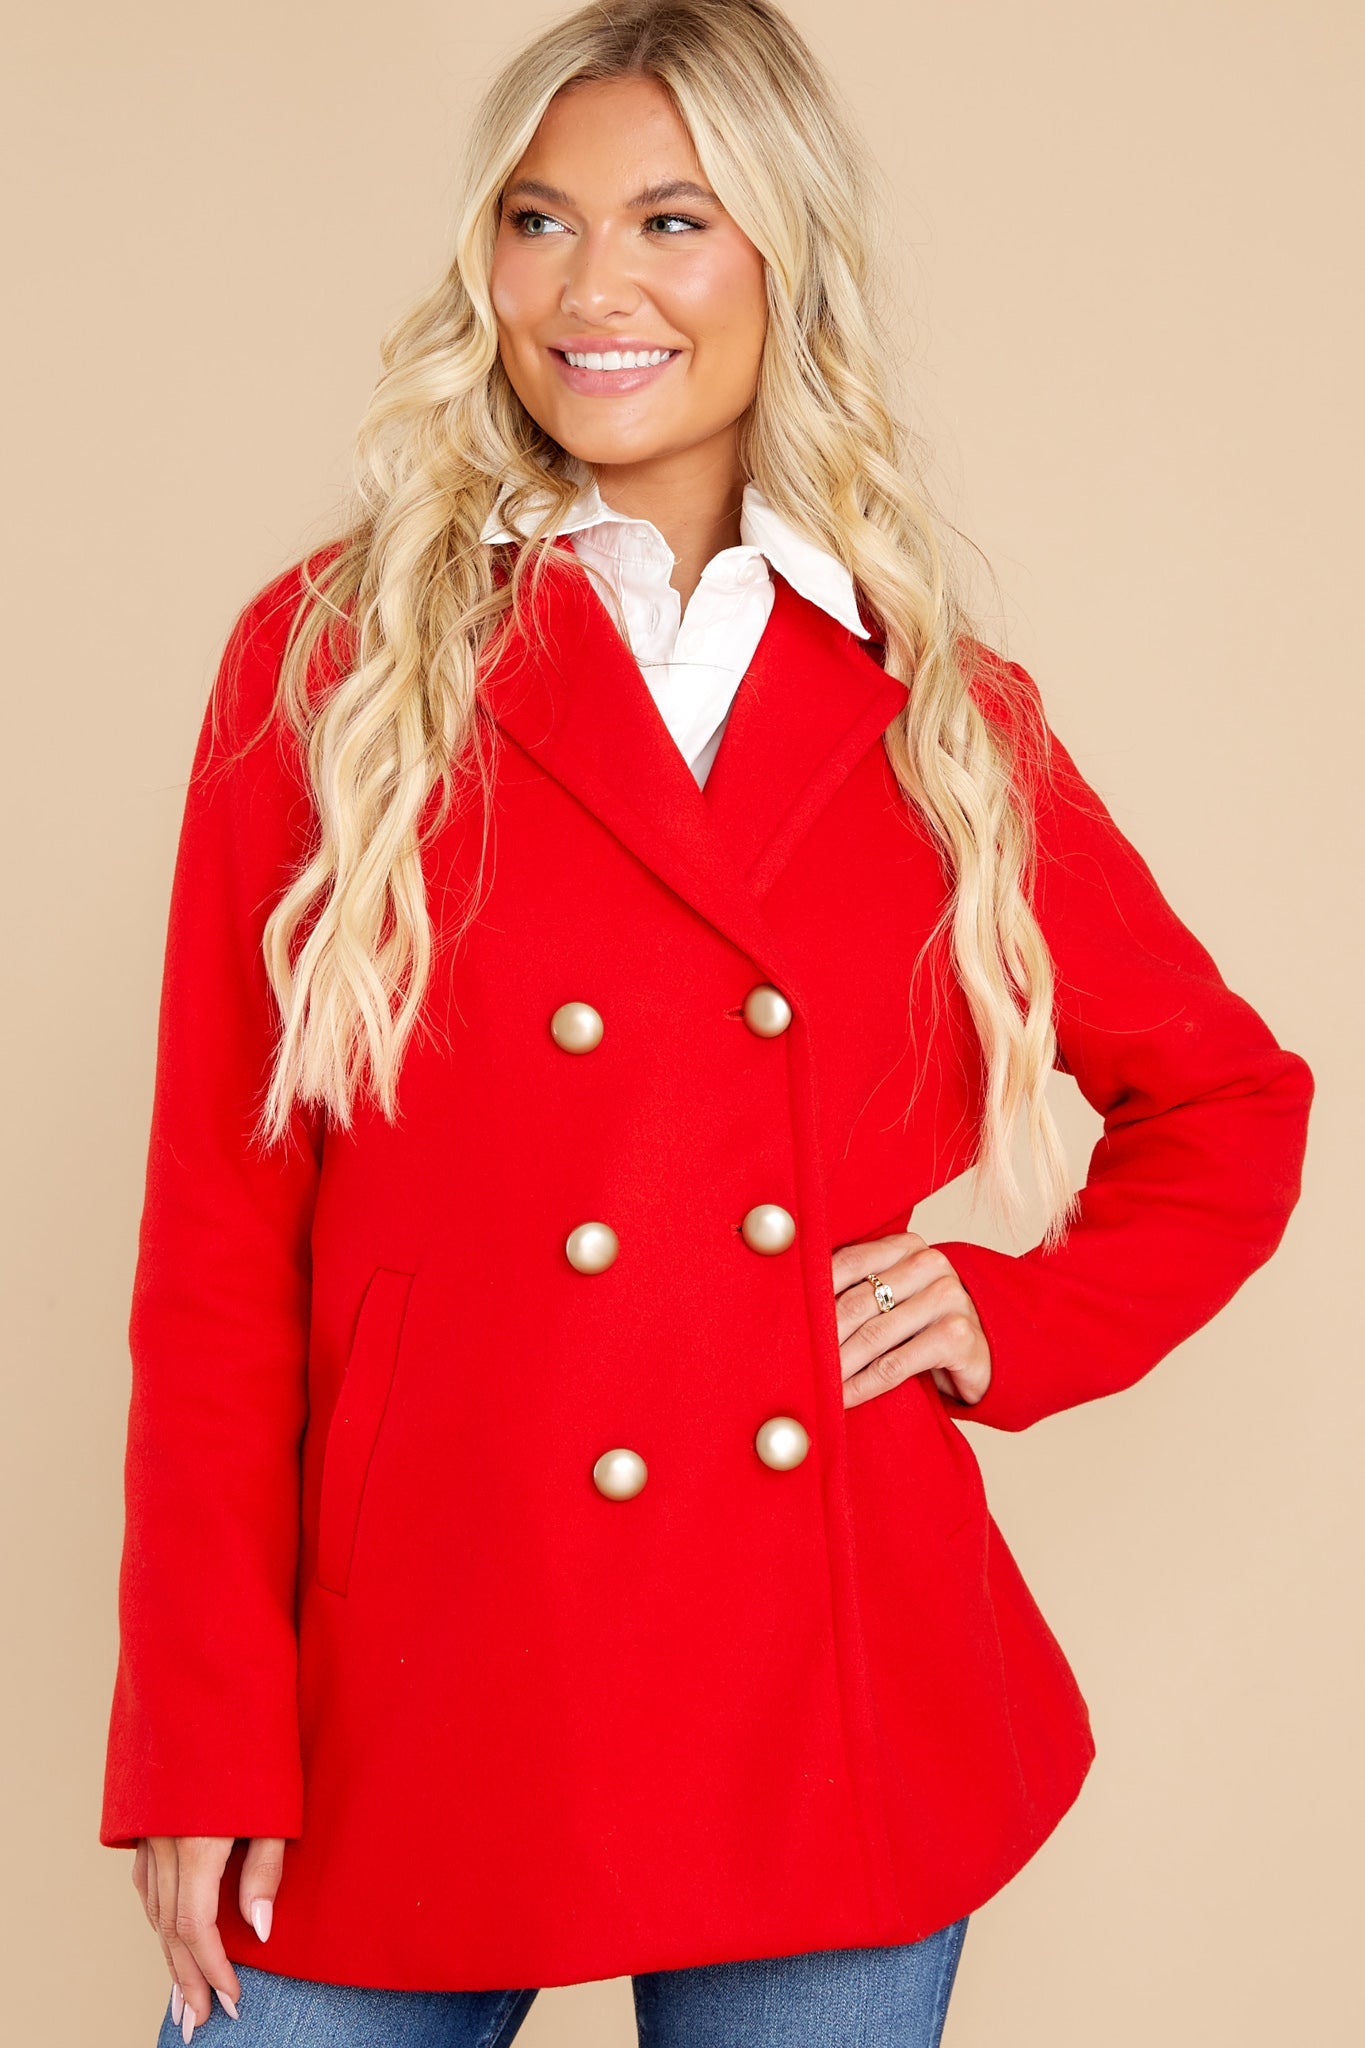 Fit For A Queen Red Coat - Red Dress